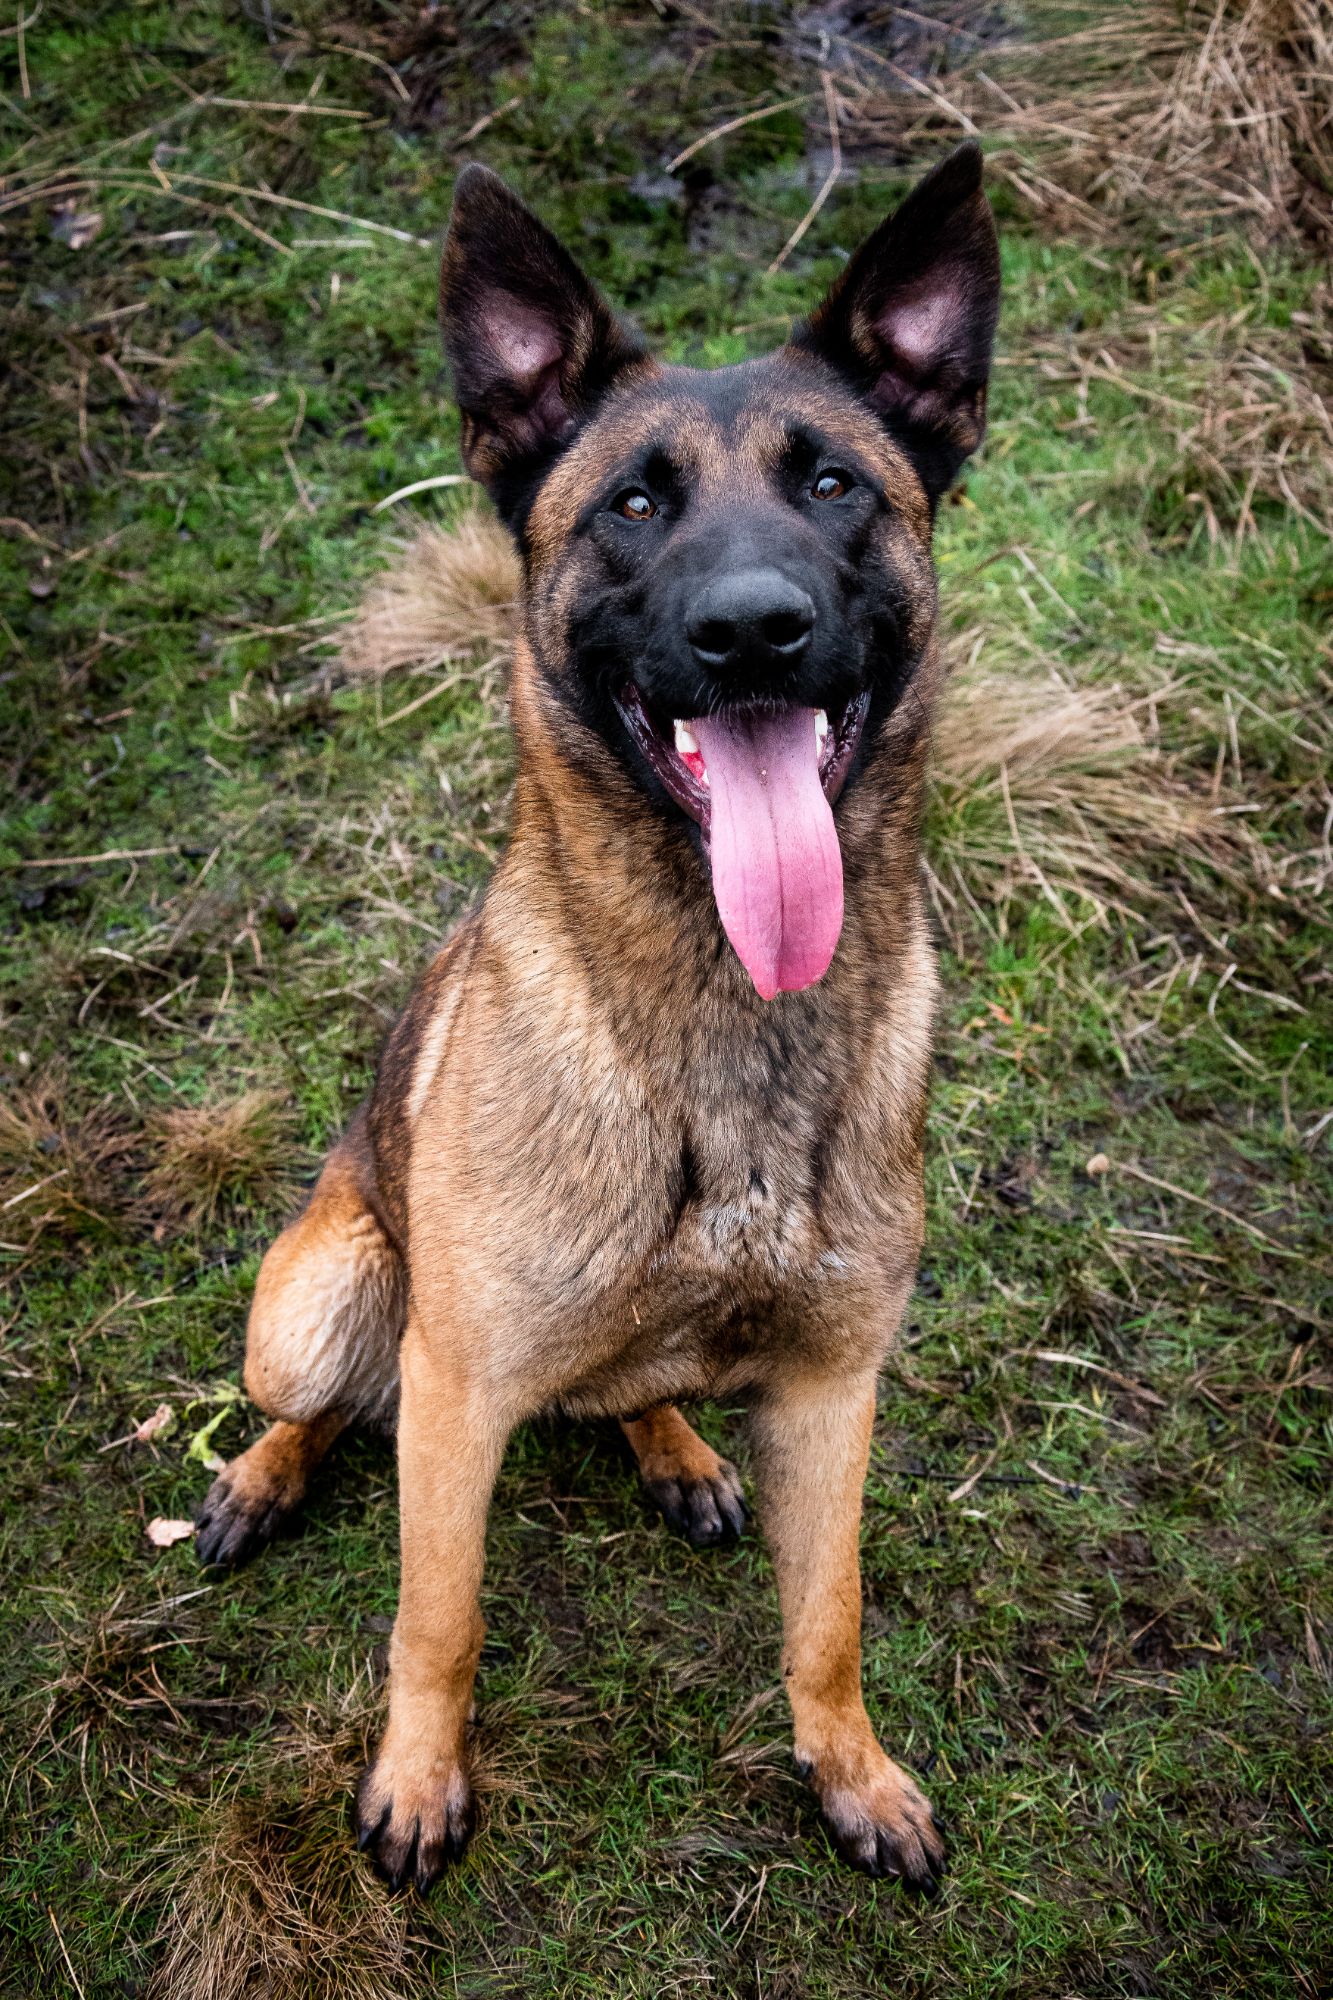 A dutch herder sits and smiles at the camera. She has her mouth open and her tongue is hanging out